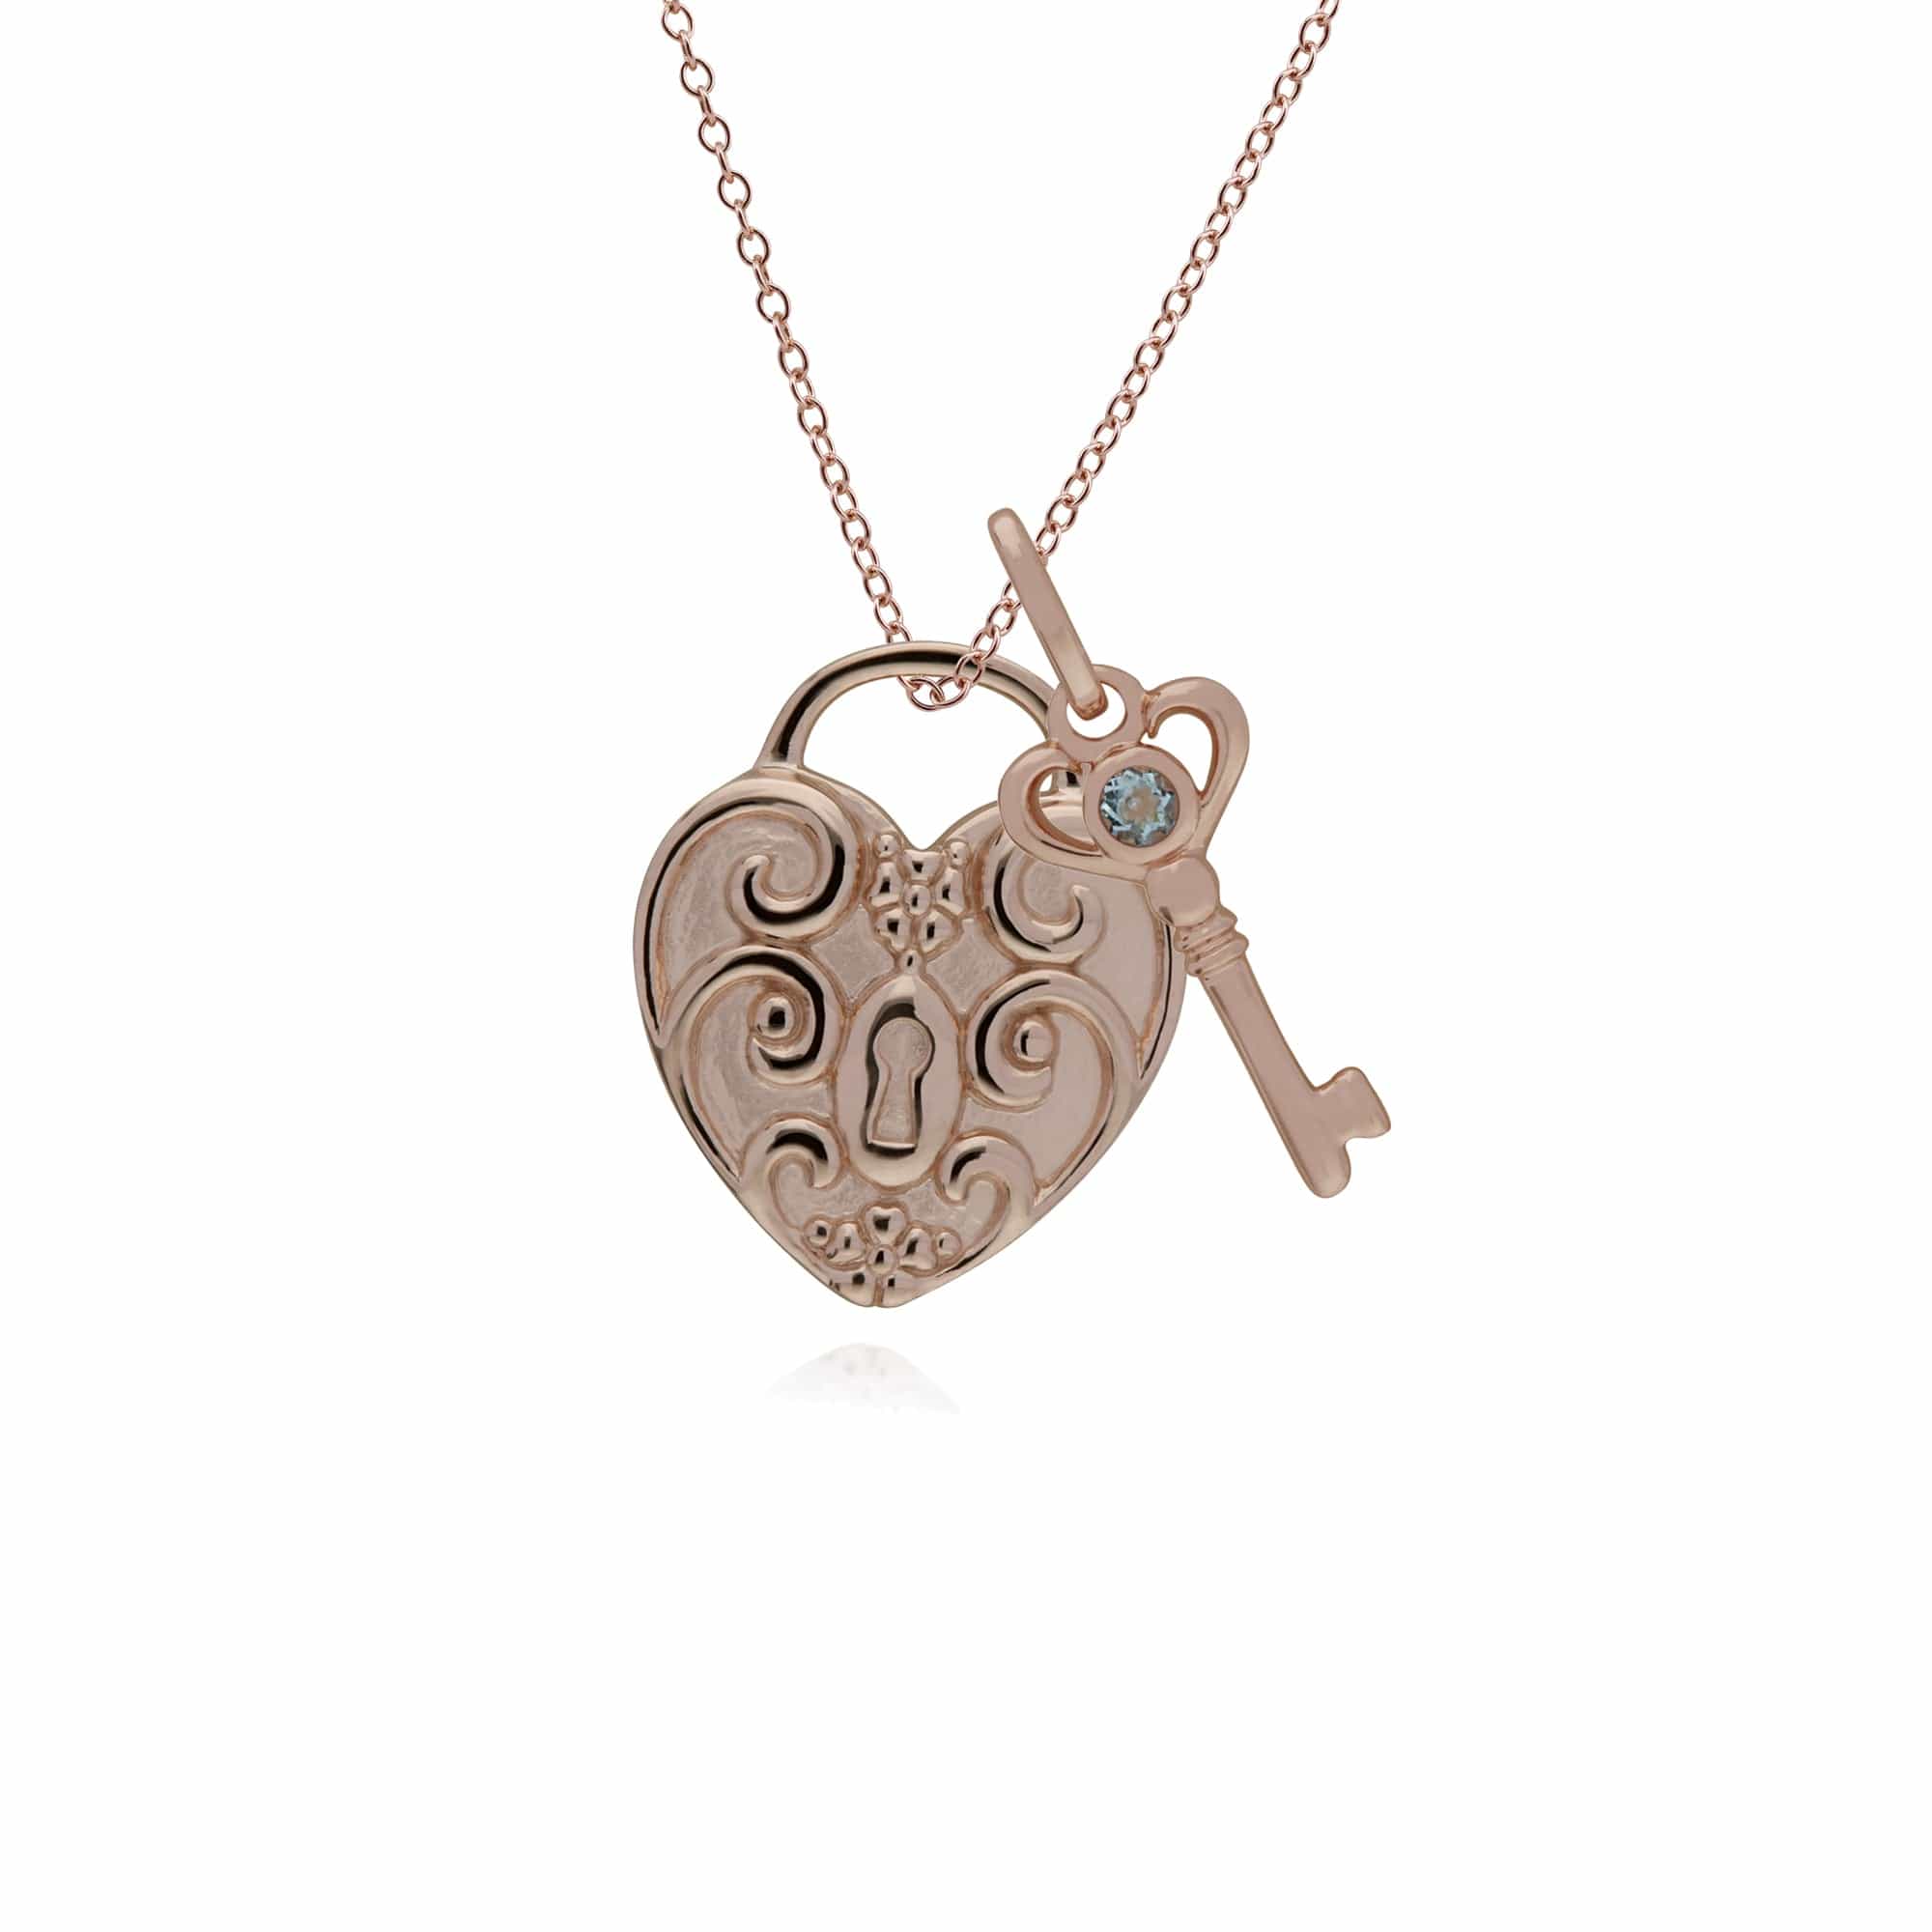 270P026309925-270P026501925 Classic Swirl Heart Lock Pendant & Aquamarine Key Charm in Rose Gold Plated 925 Sterling Silver 1